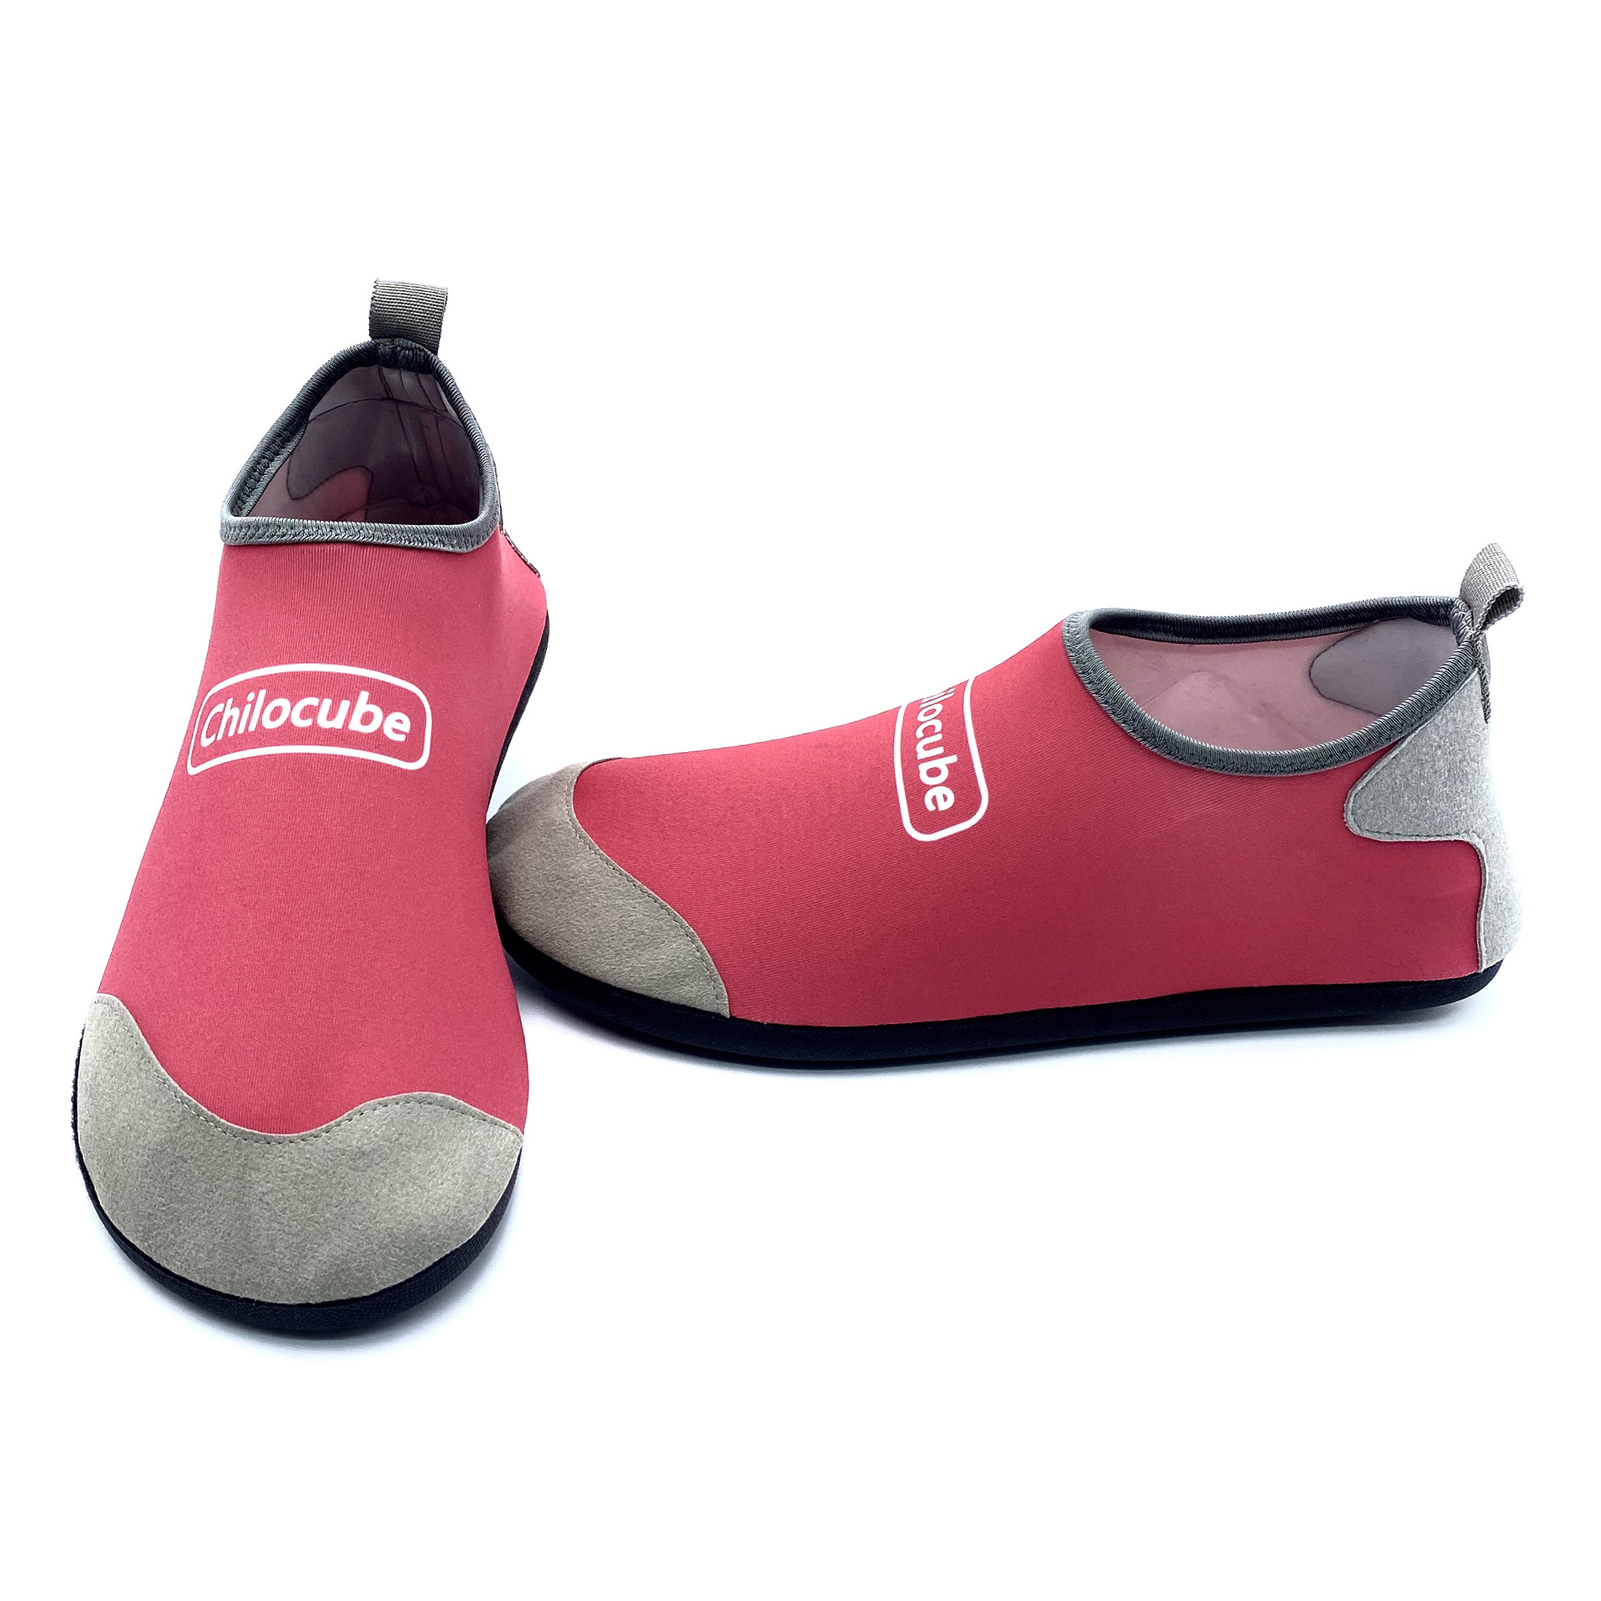 Unisex Barefoot Shoes Super Shoes Quick Dry -Slip Diving Boots Beach Shoes Aqua Socks for Snorkeling Diving Canyoning - image 1 of 7